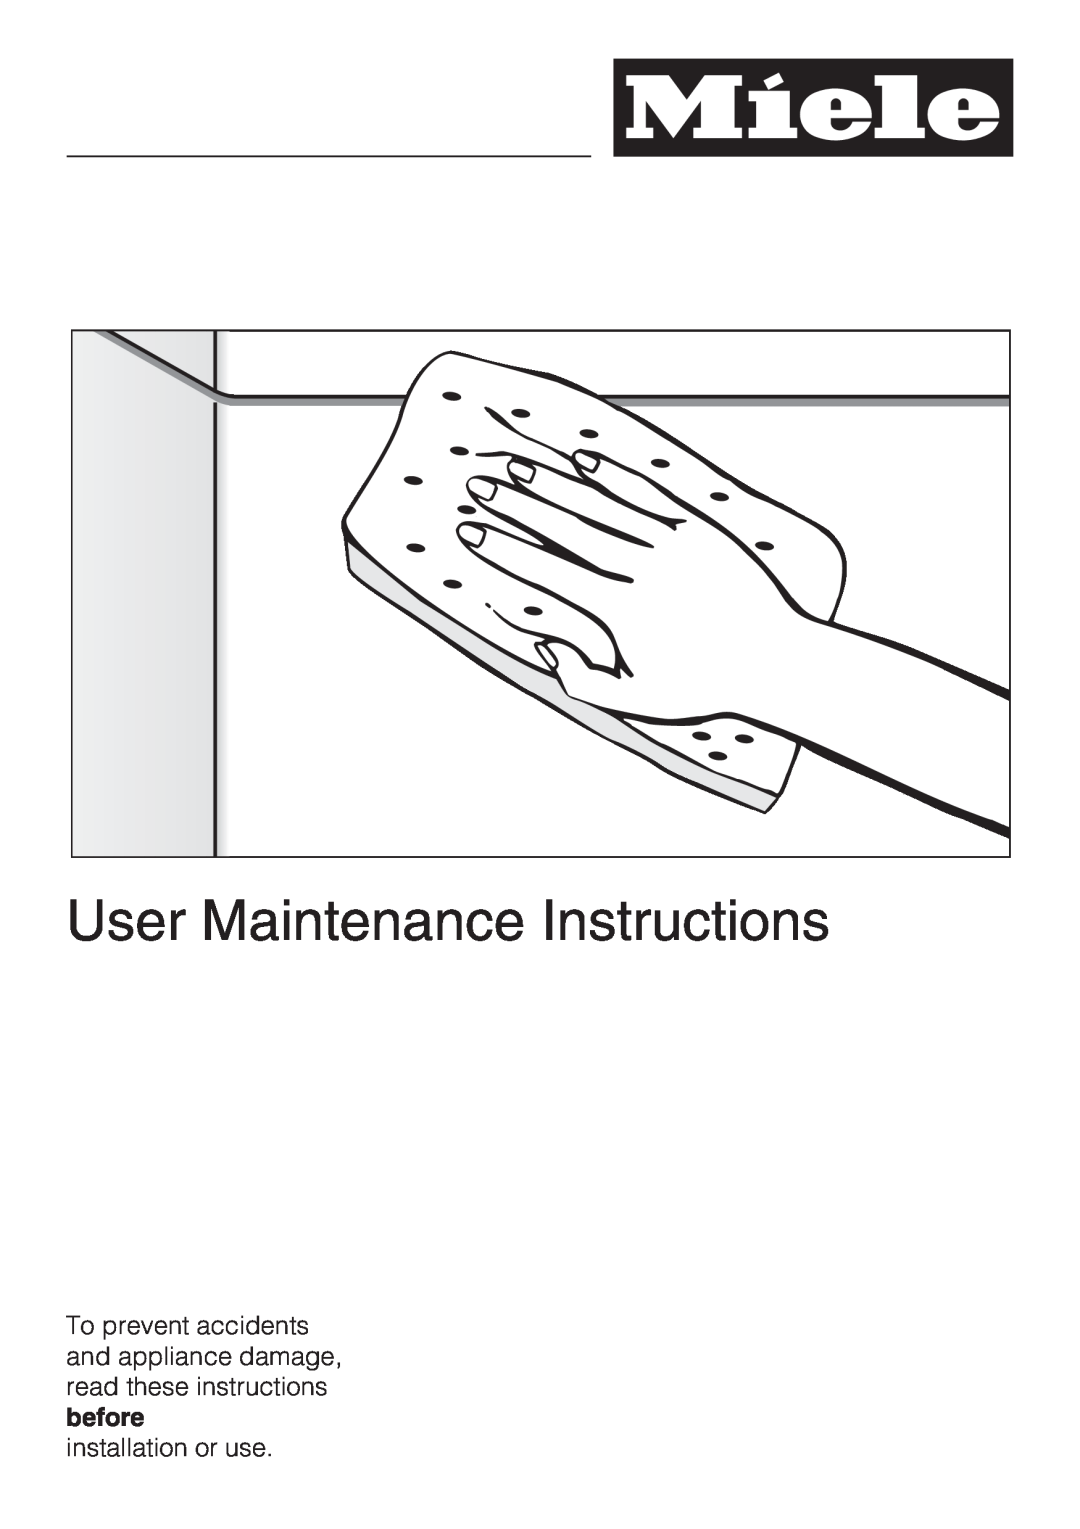 Miele G 5795, G 5970 manual User Maintenance Instructions, installation or use 